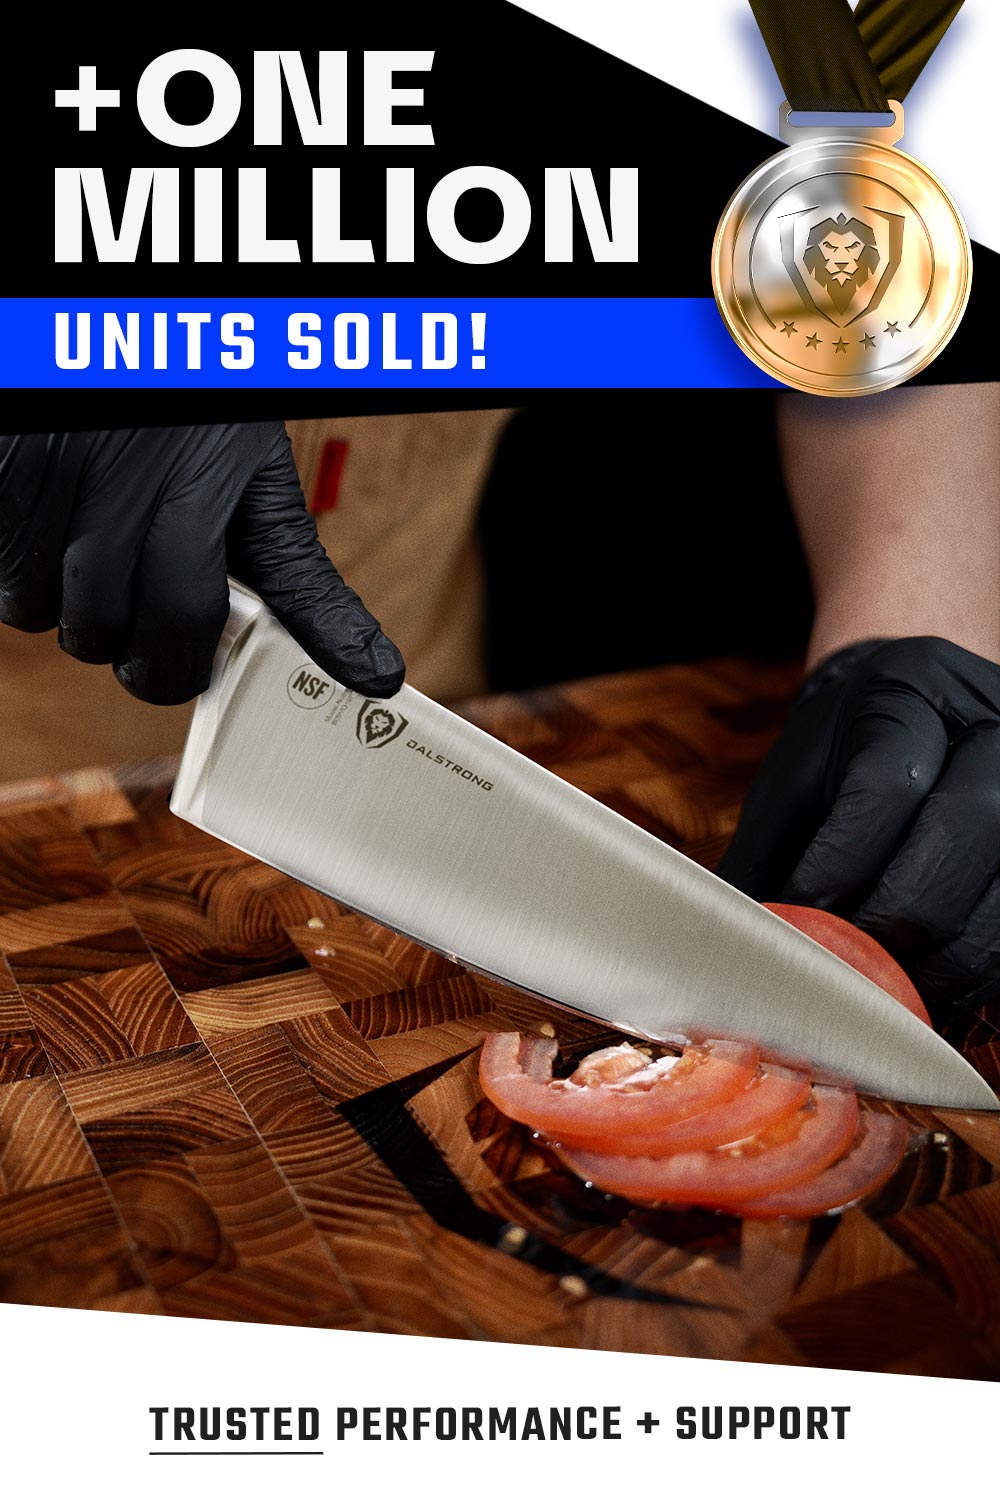 Dalstrong gladiator series 8 inch chef knife with black handle showcasing it's sales.